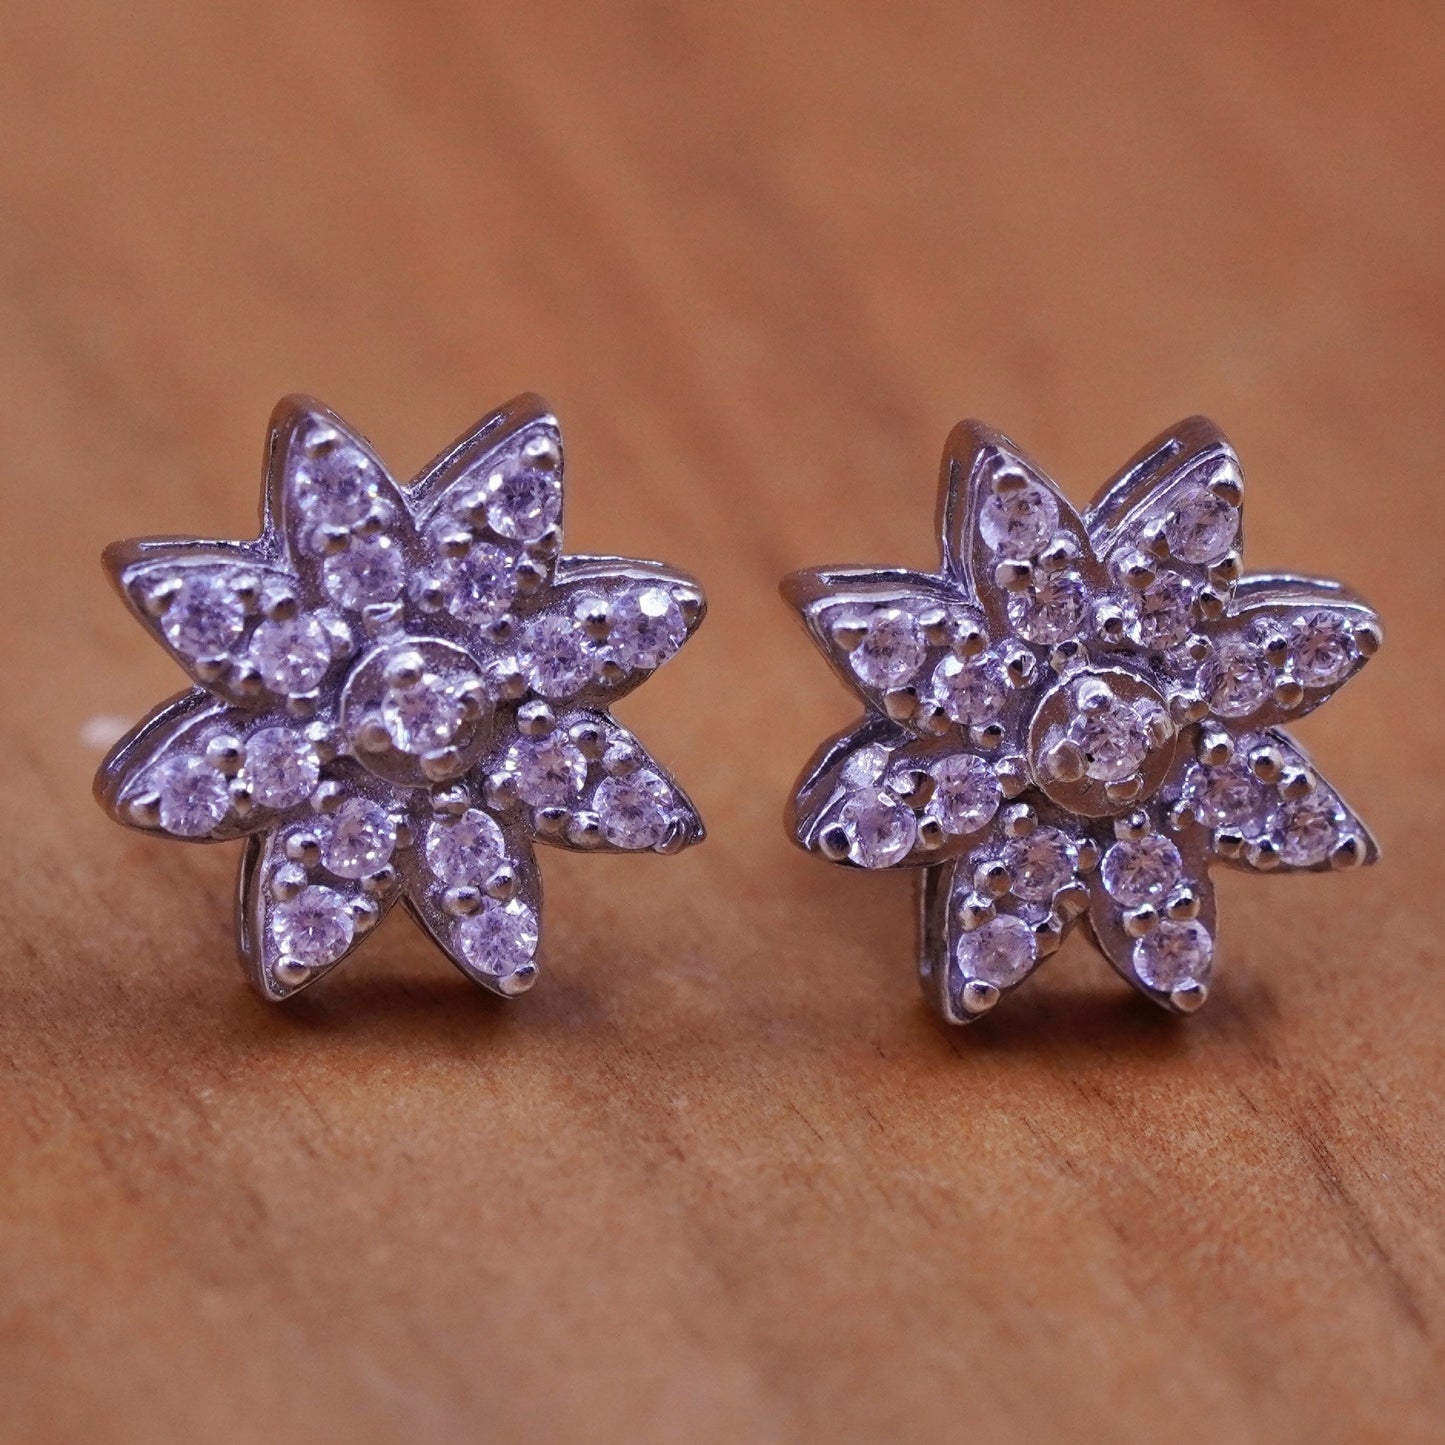 10mm, vintage Sterling silver clear round crystal flower studs, cz earrings